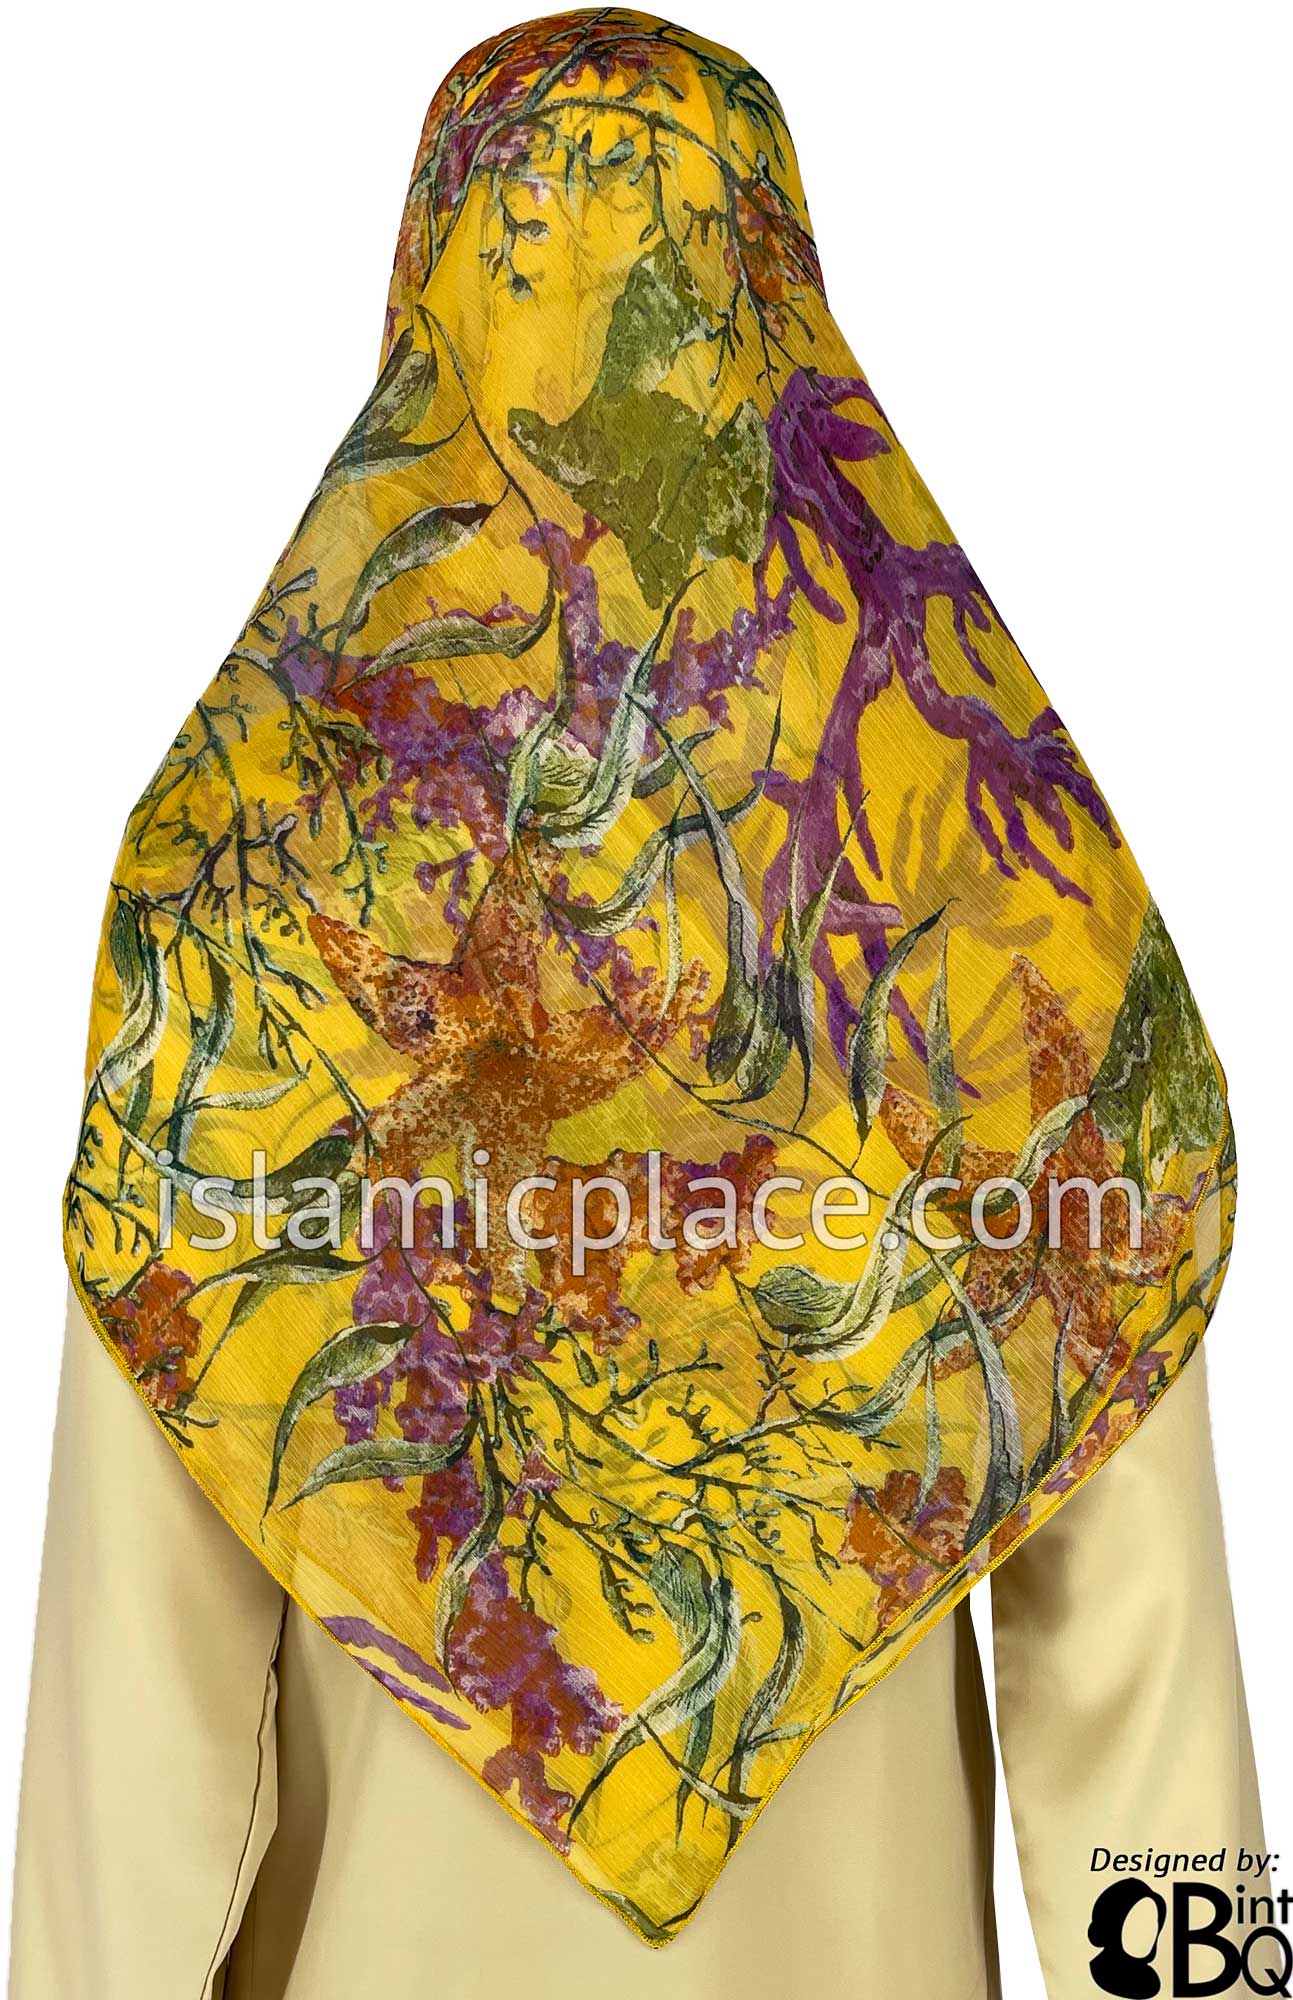 Green, Plum, Mustard Yellow on Green Branches and Floral Design - 45" Square Printed Khimar